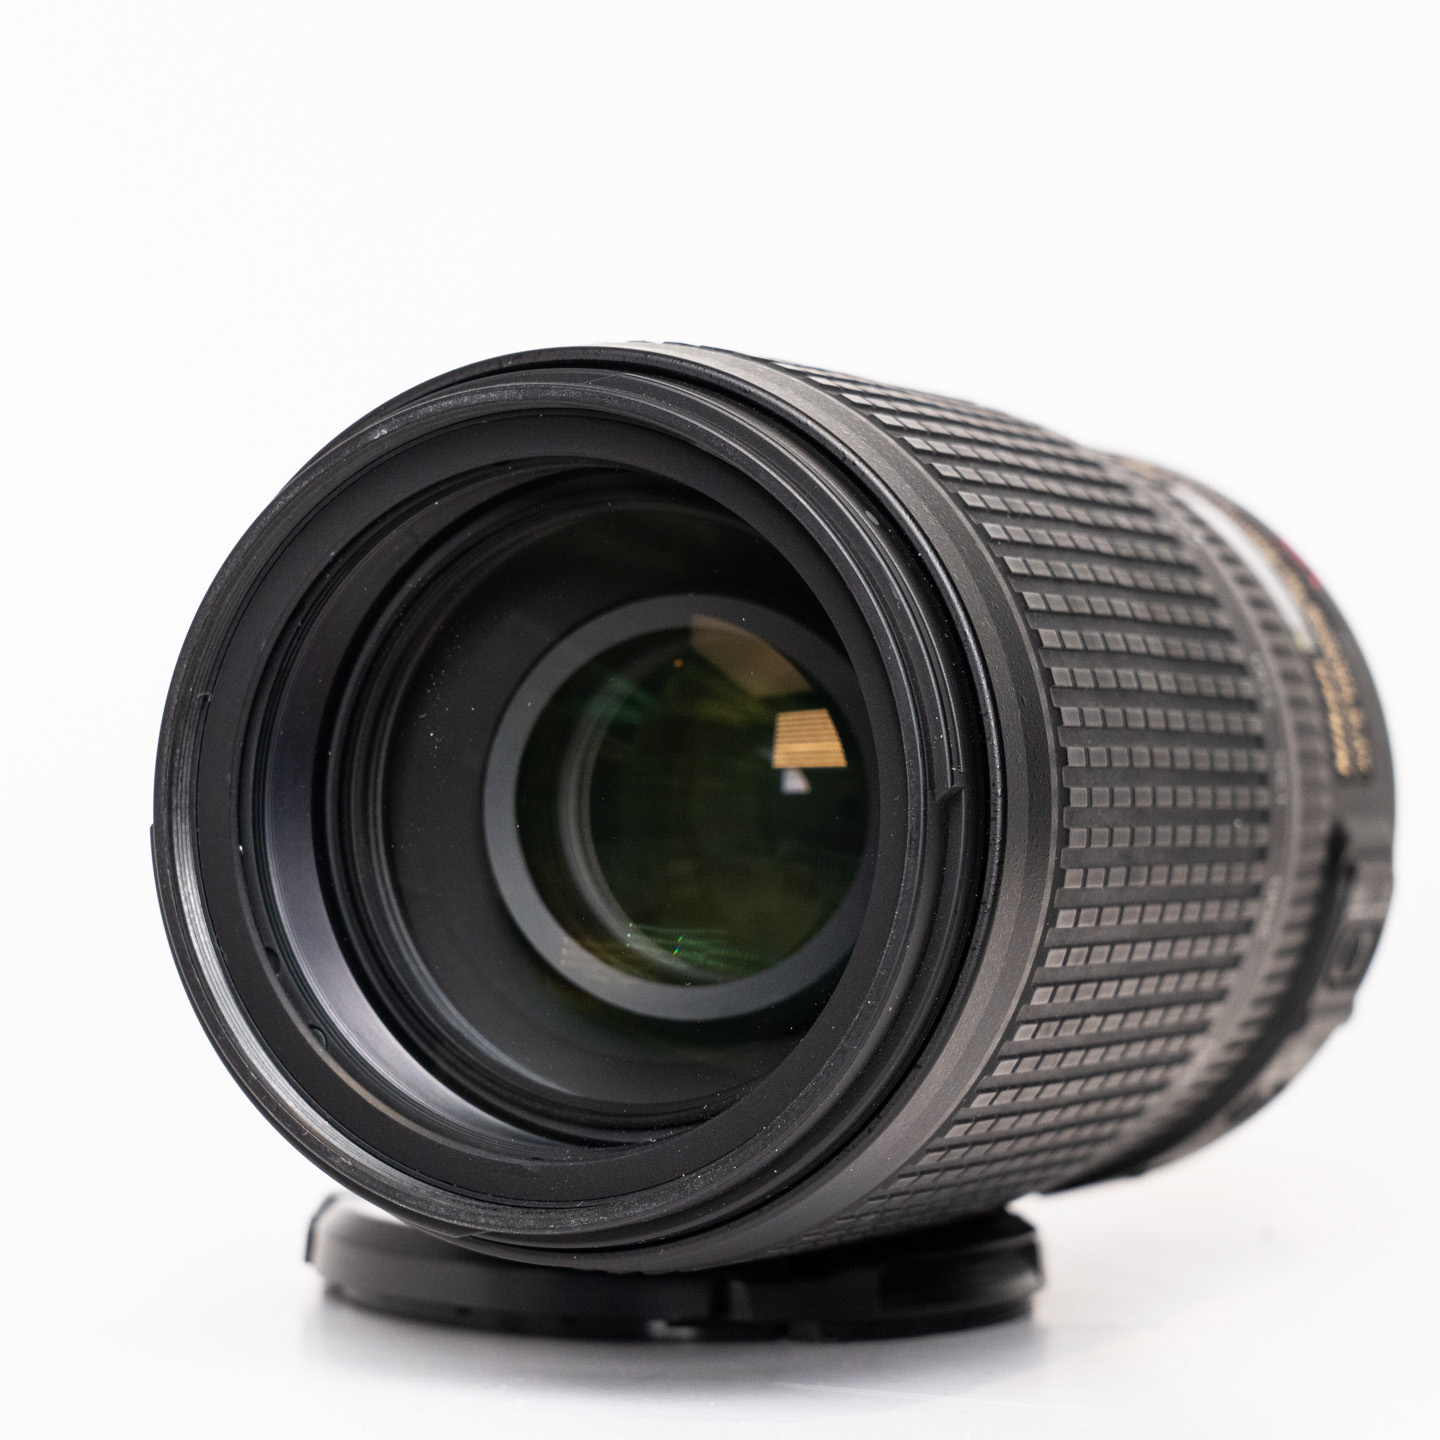 Used Nikon 70-300mm F/4.5-5.6 G VR Lens From Focal Point ...